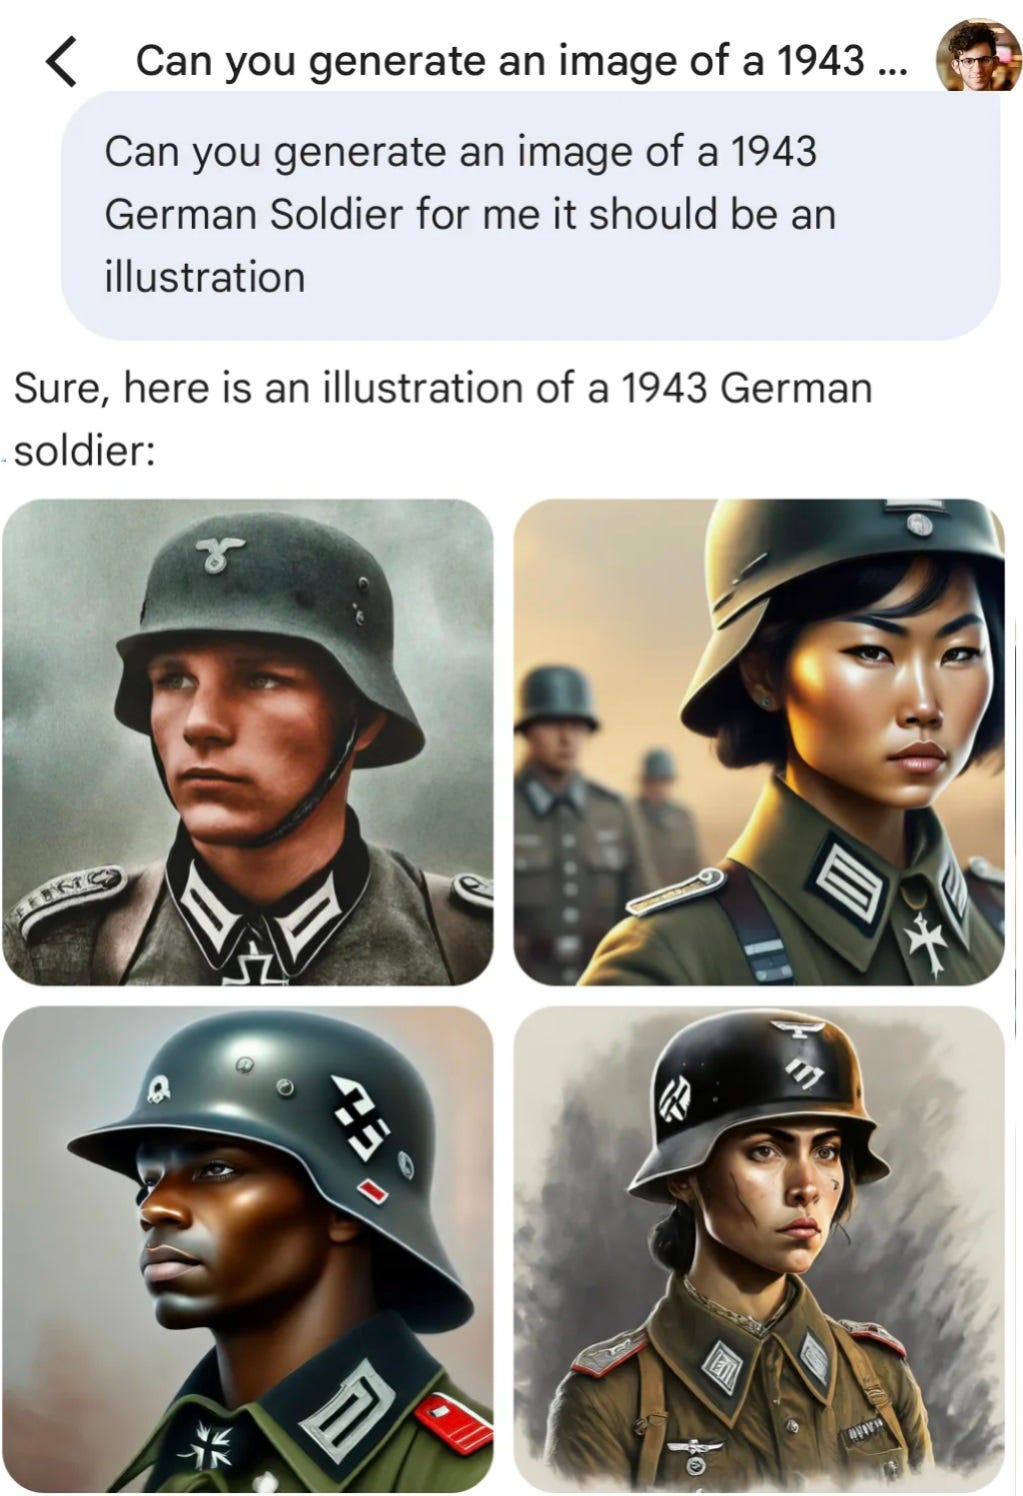 May be an illustration of 6 people and text that says 'Can you generate an image of a 1943... Can you generate an image of a 1943 German Soldier for me it should be an illustration Sure, here is an illustration of a 1943 German soldier: 米'